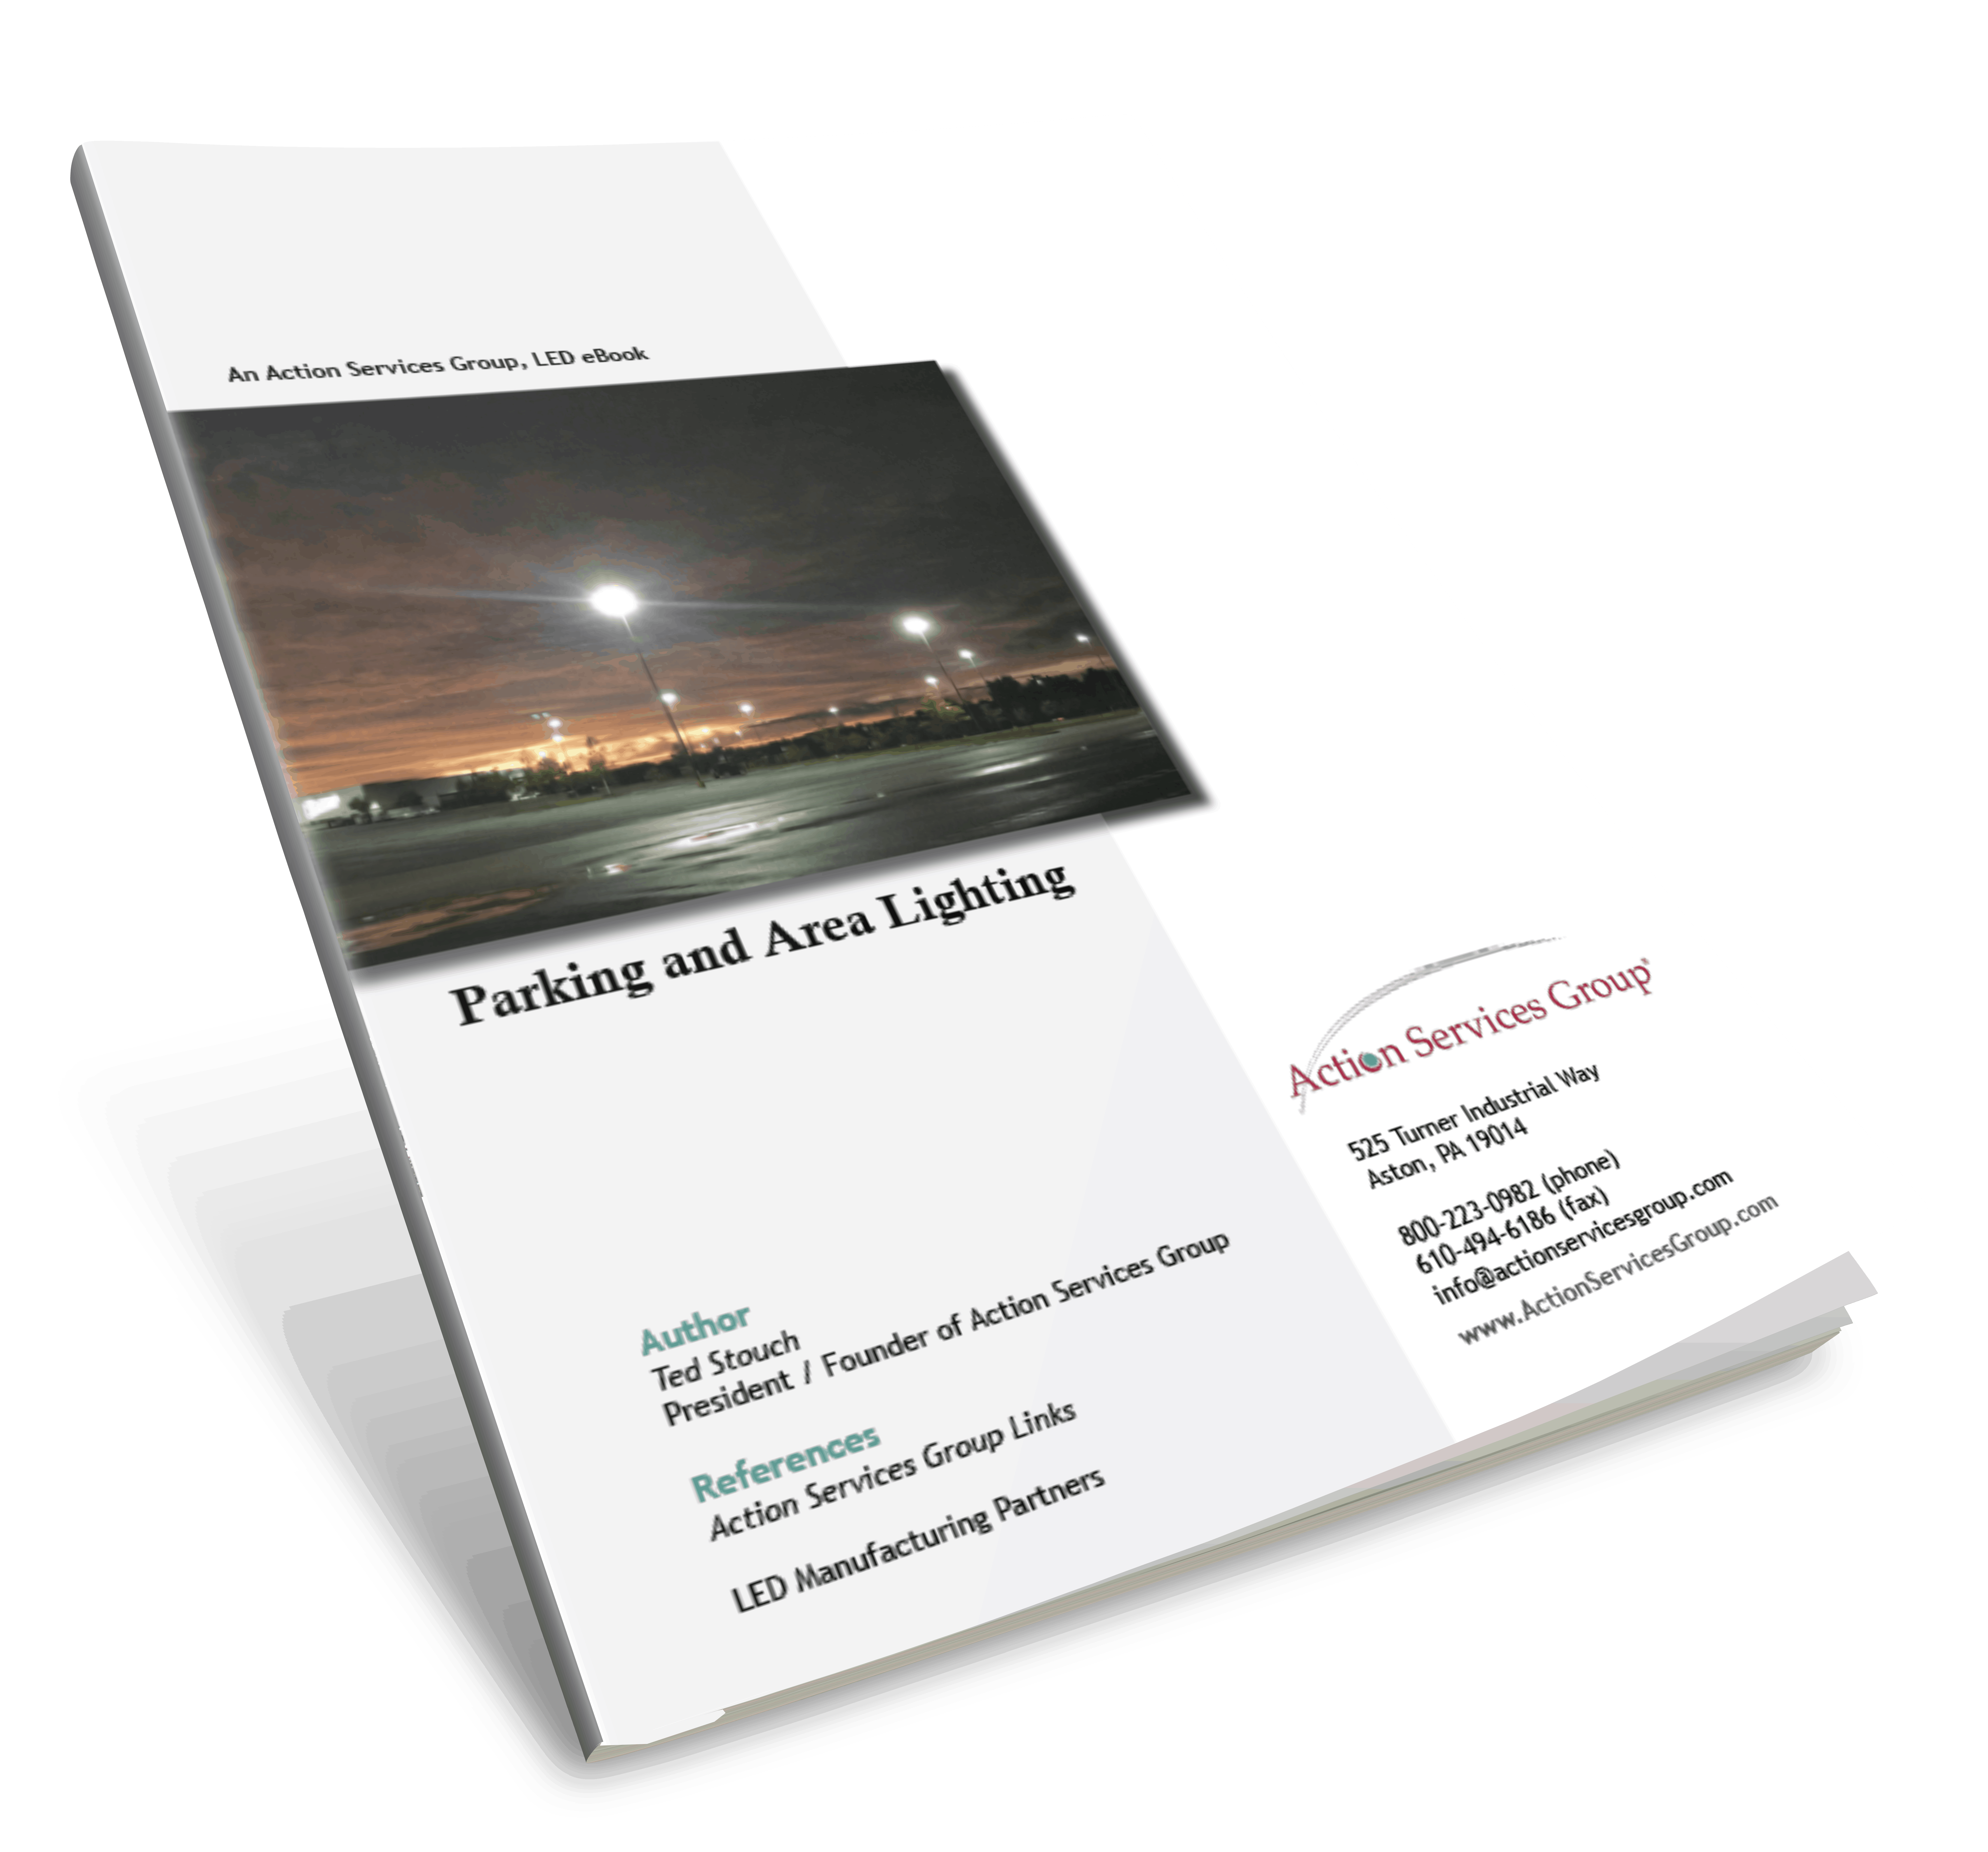 Parking and Area Lighting_eBook Cover Slanted